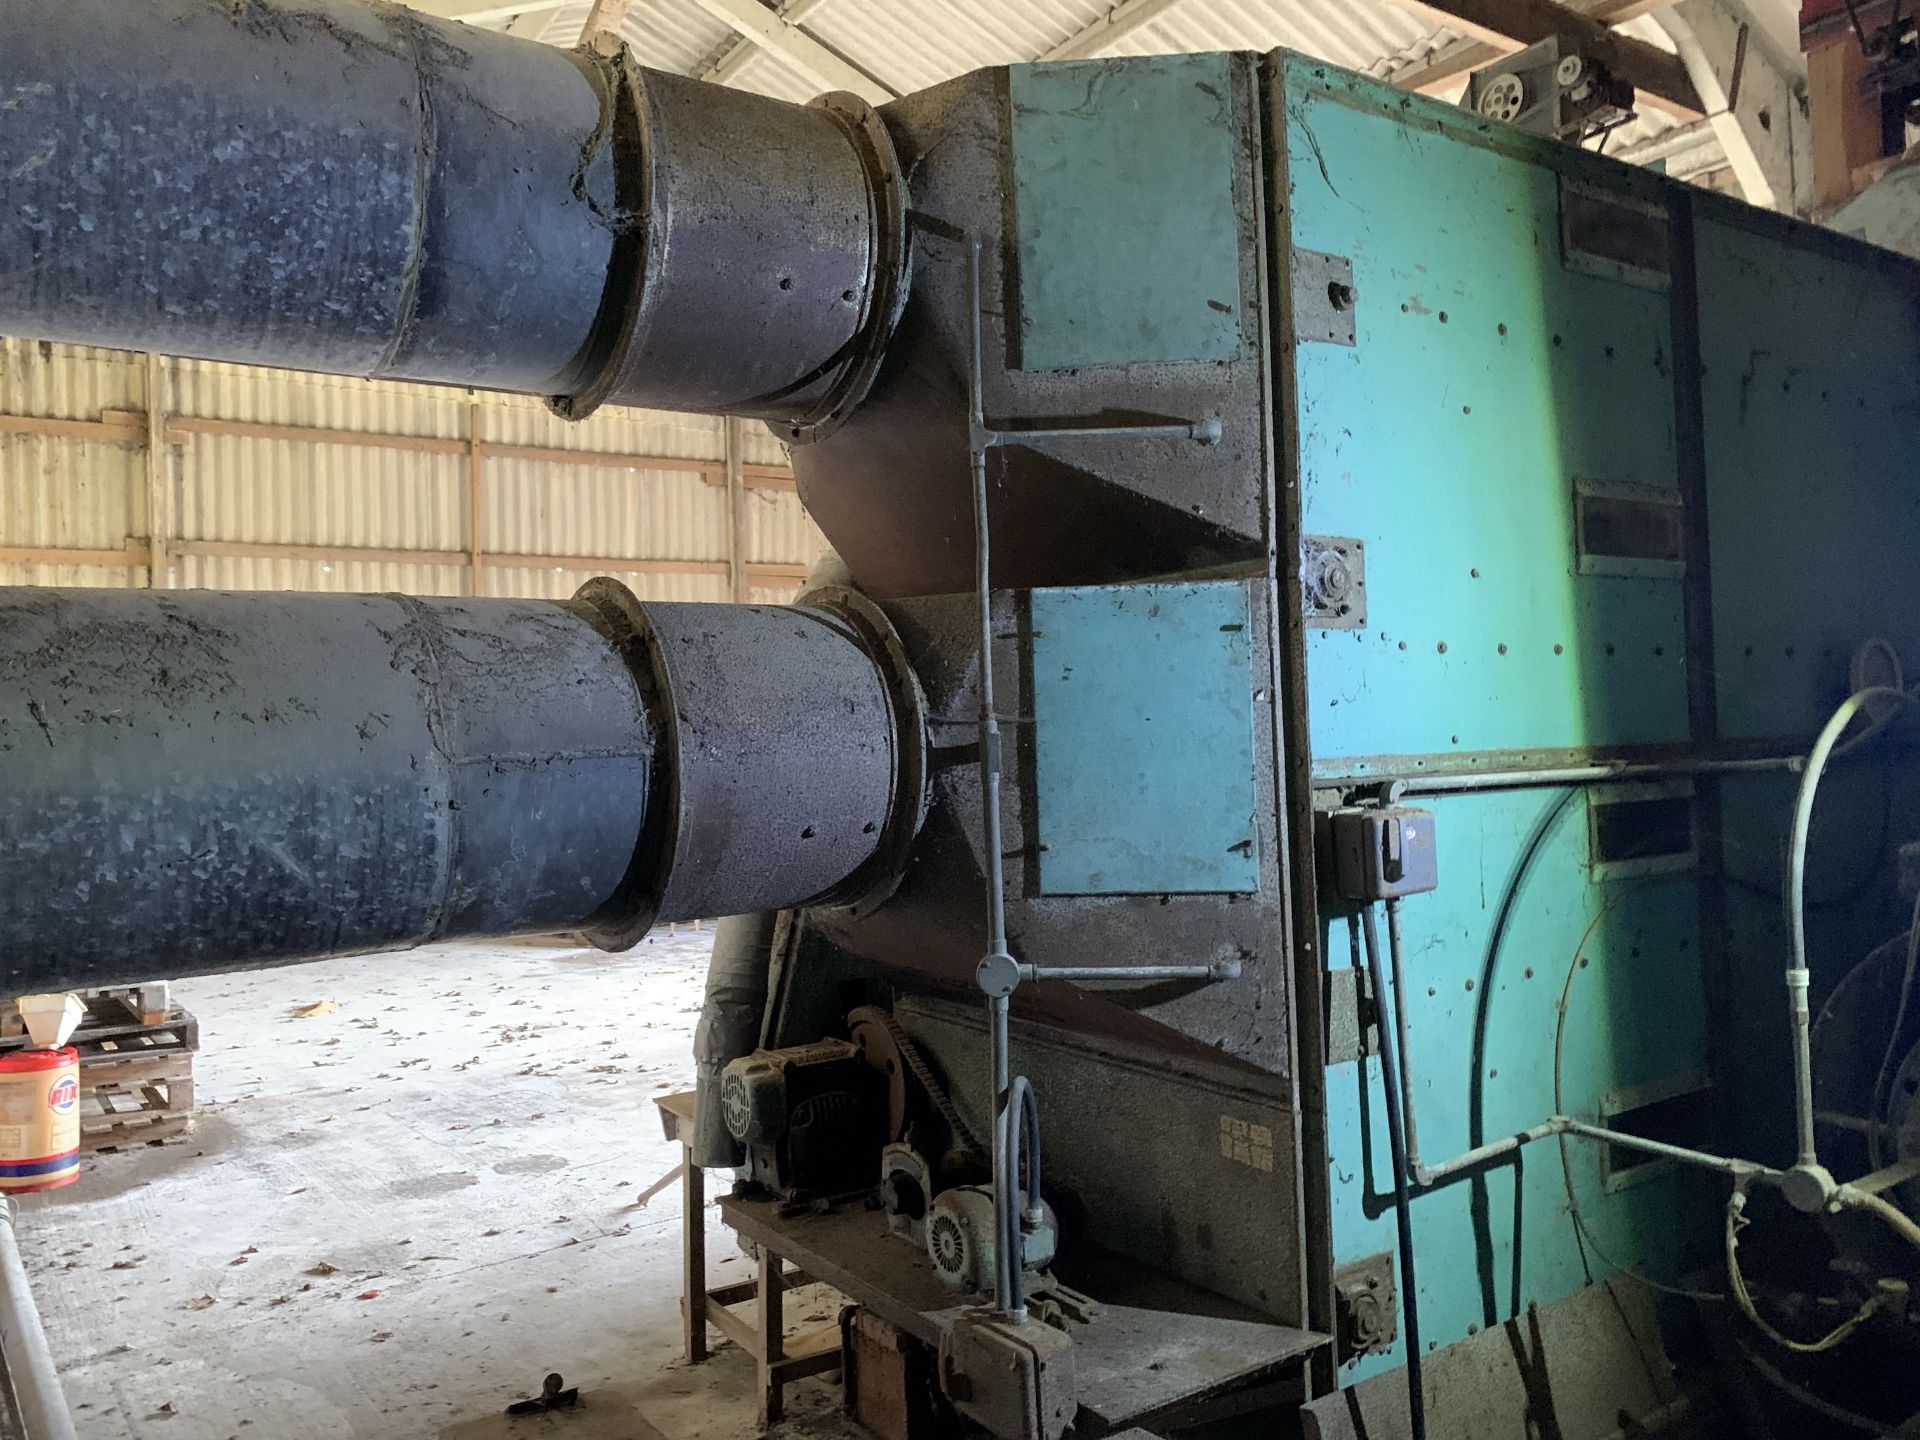 Corn dryer system, purchaser to remove - Image 3 of 4